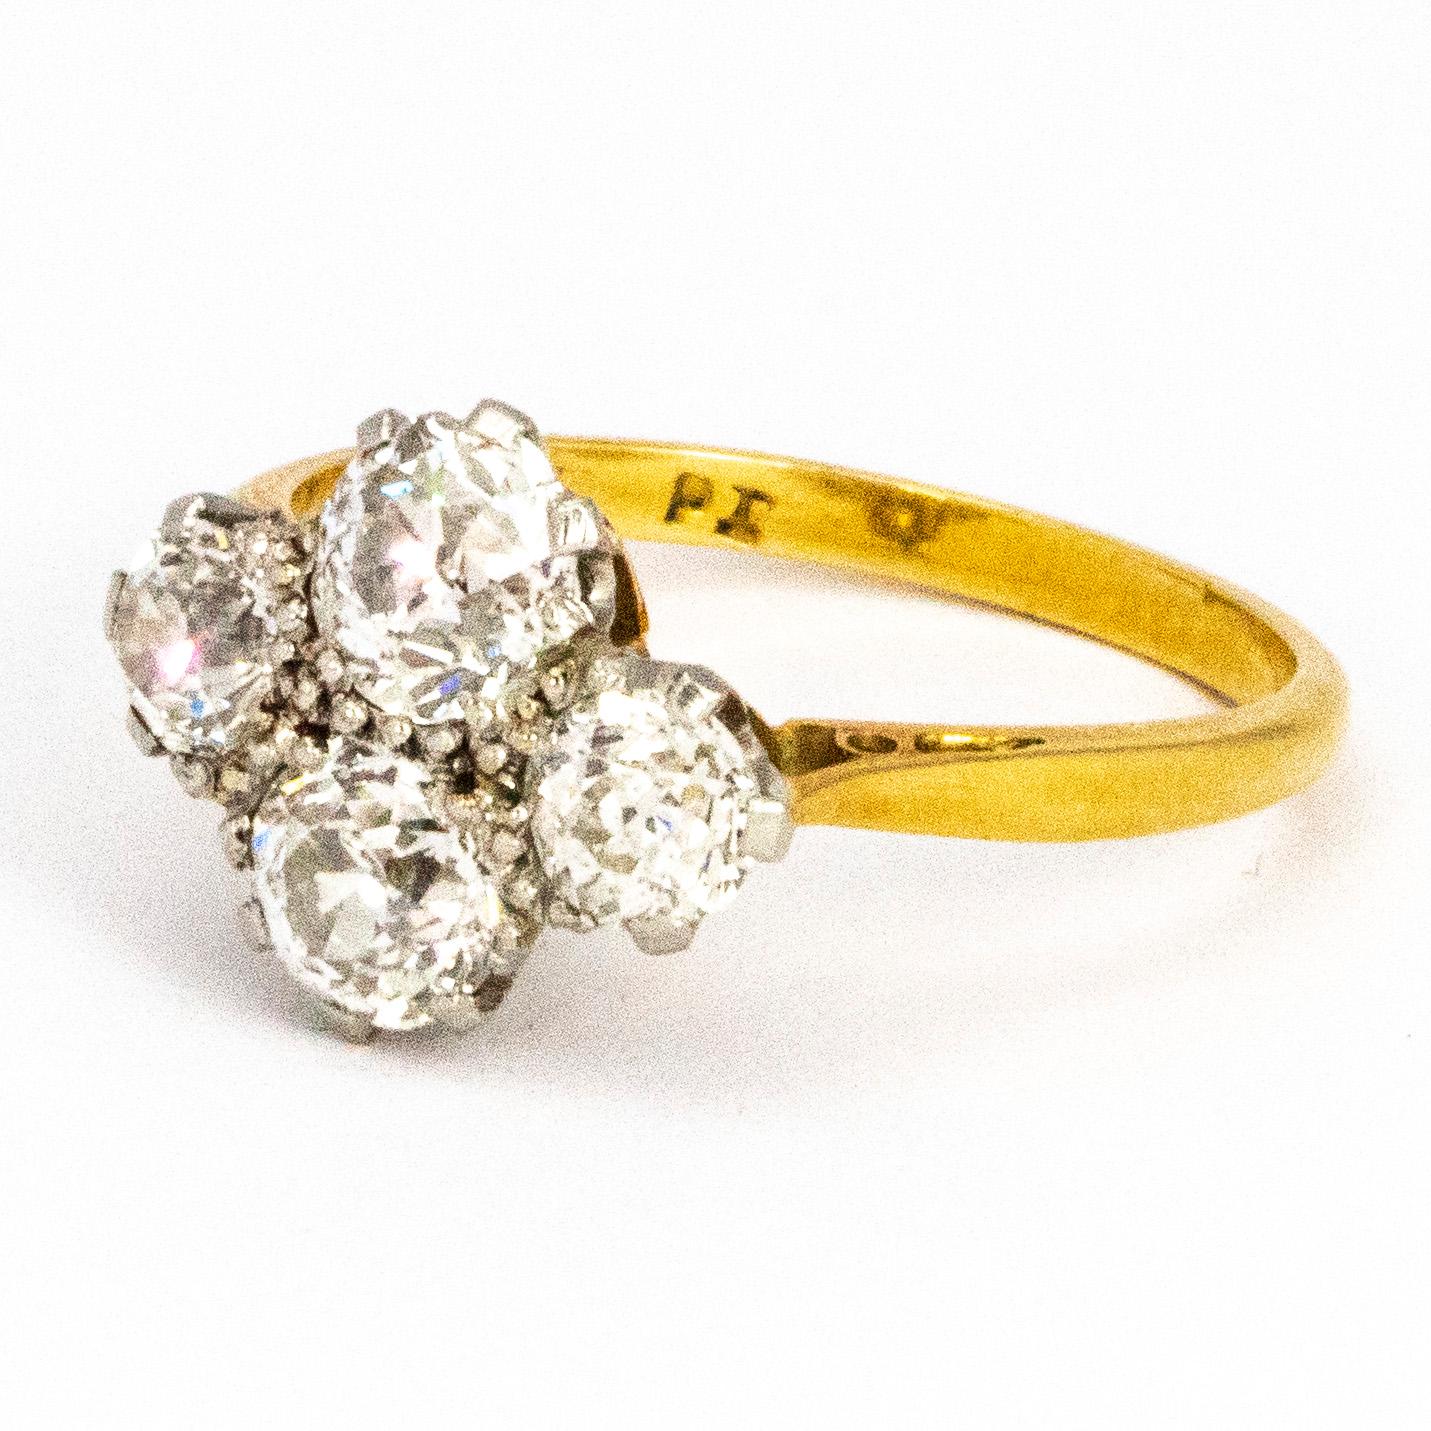 This gorgeous four stone ring holds four lovely sized diamonds. Two of which measuring 60pts and the other two 40pts each totalling 2 carats worth of diamonds in this ring. The stones are set in platinum and the shank is modelled in 18carat gold The